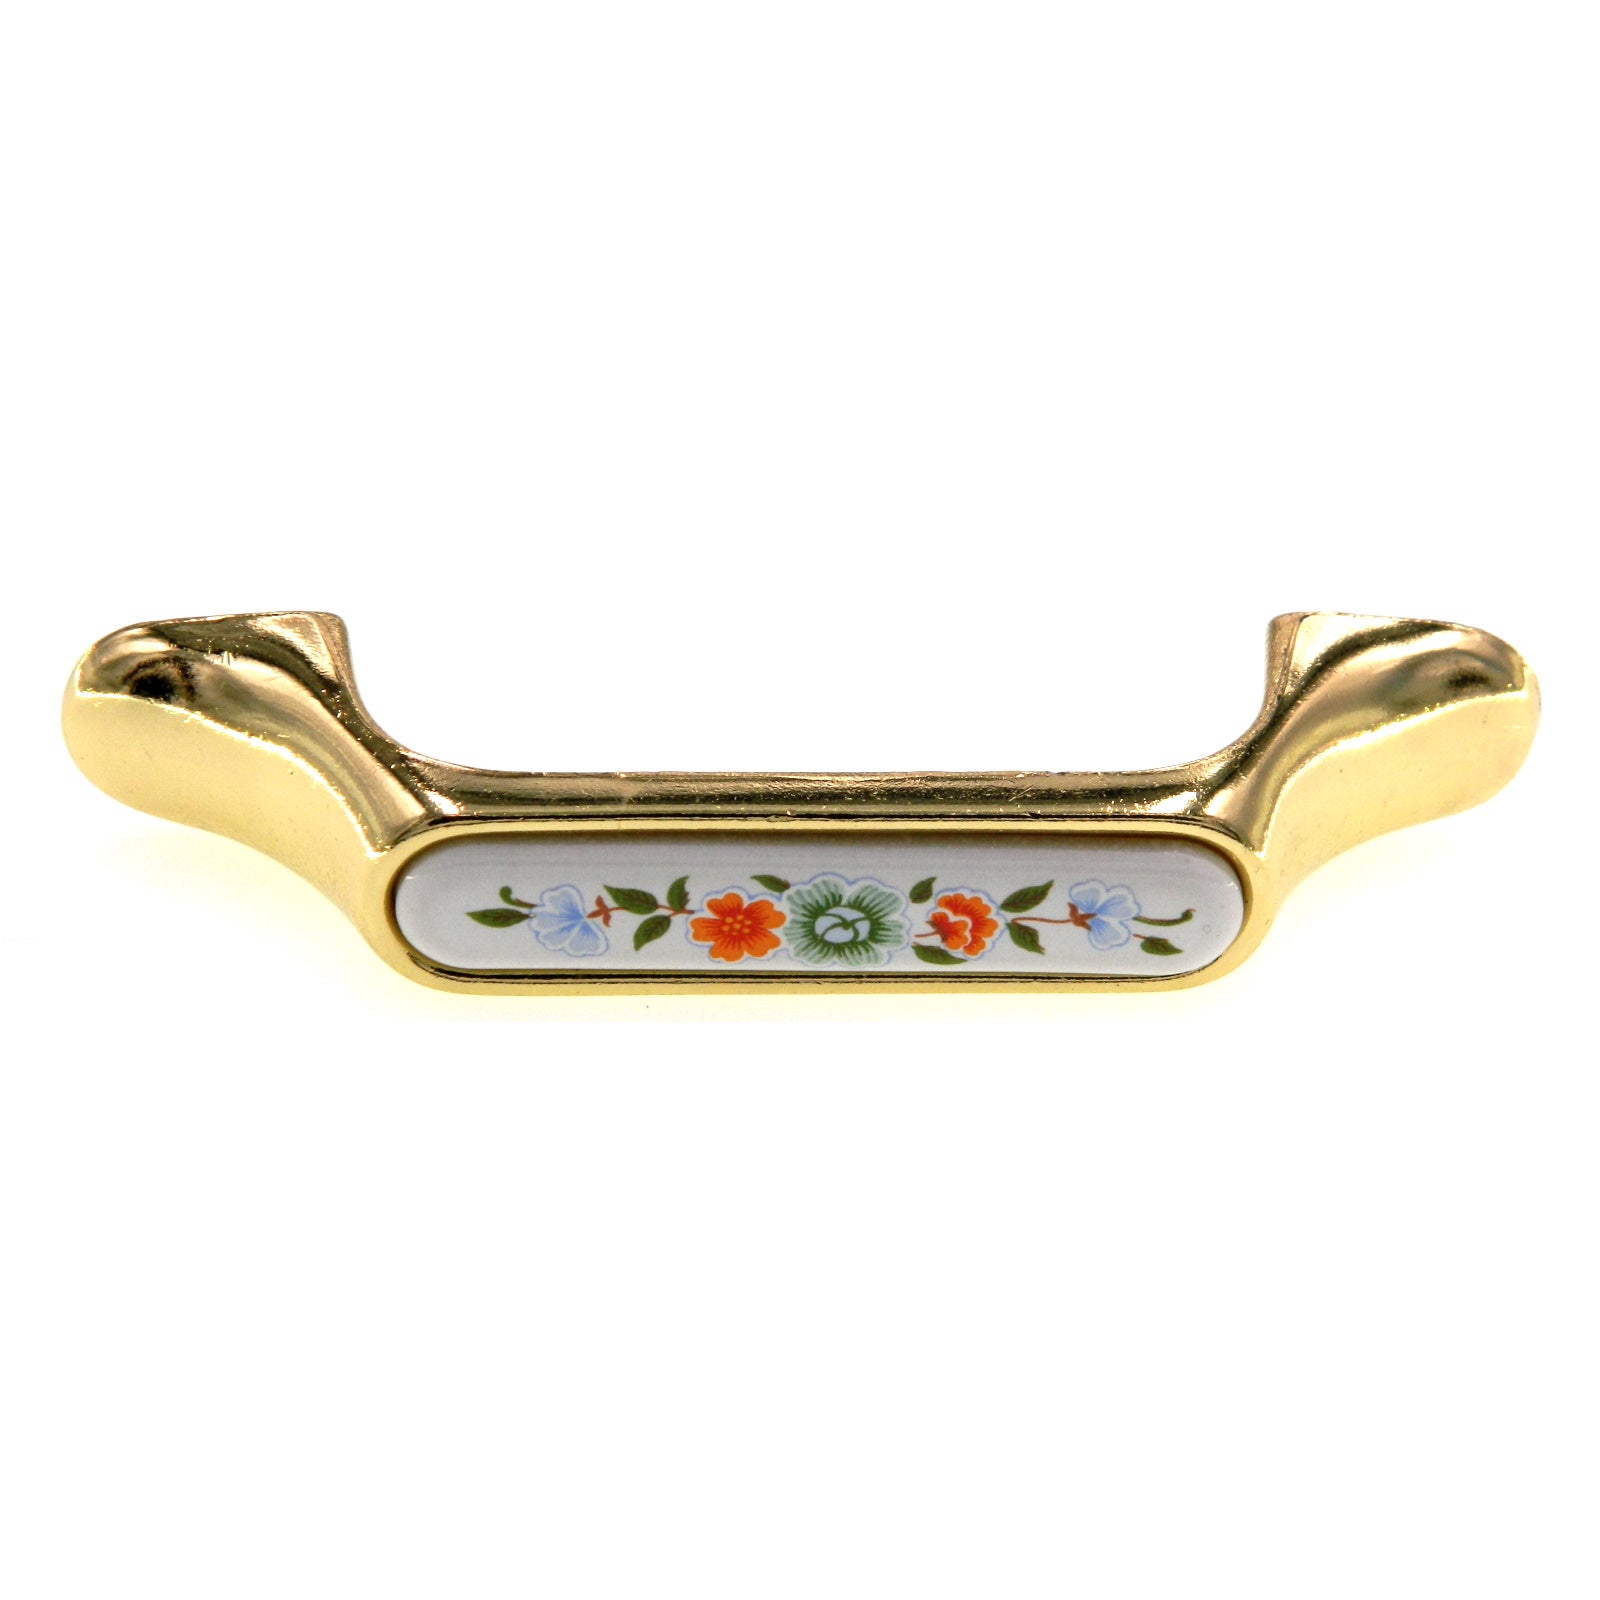 Amerock Bright Brass 3" Ctr. Arch Pull Cabinet Handle BP983-CW4